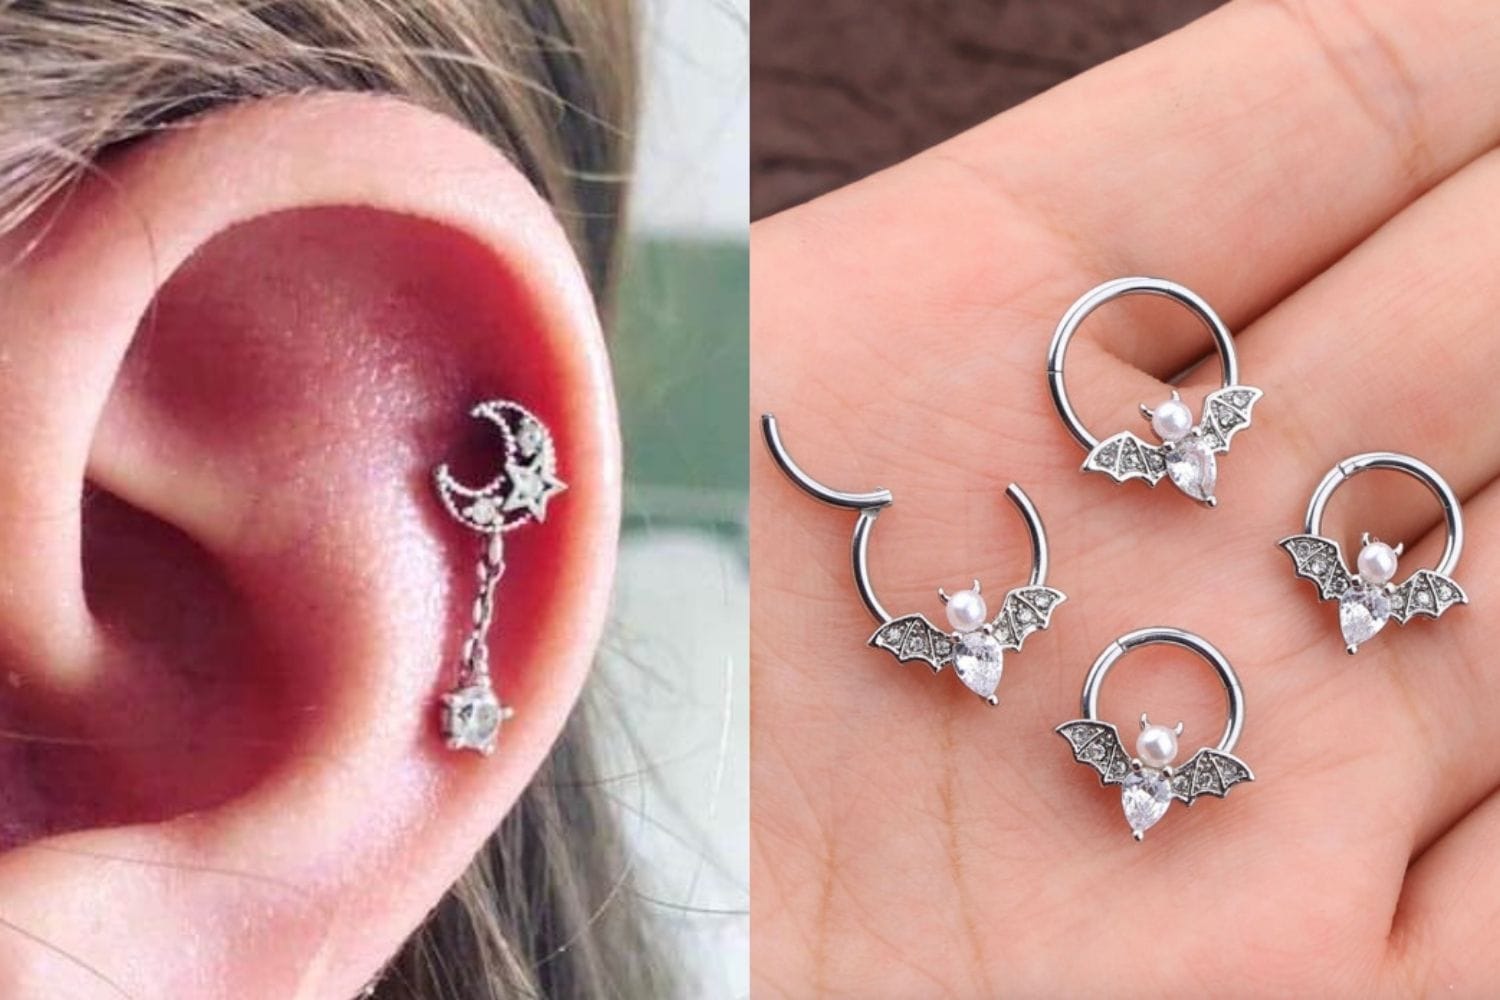 10. The Benefits of Wearing Nail Art Piercing Jewelry - wide 4